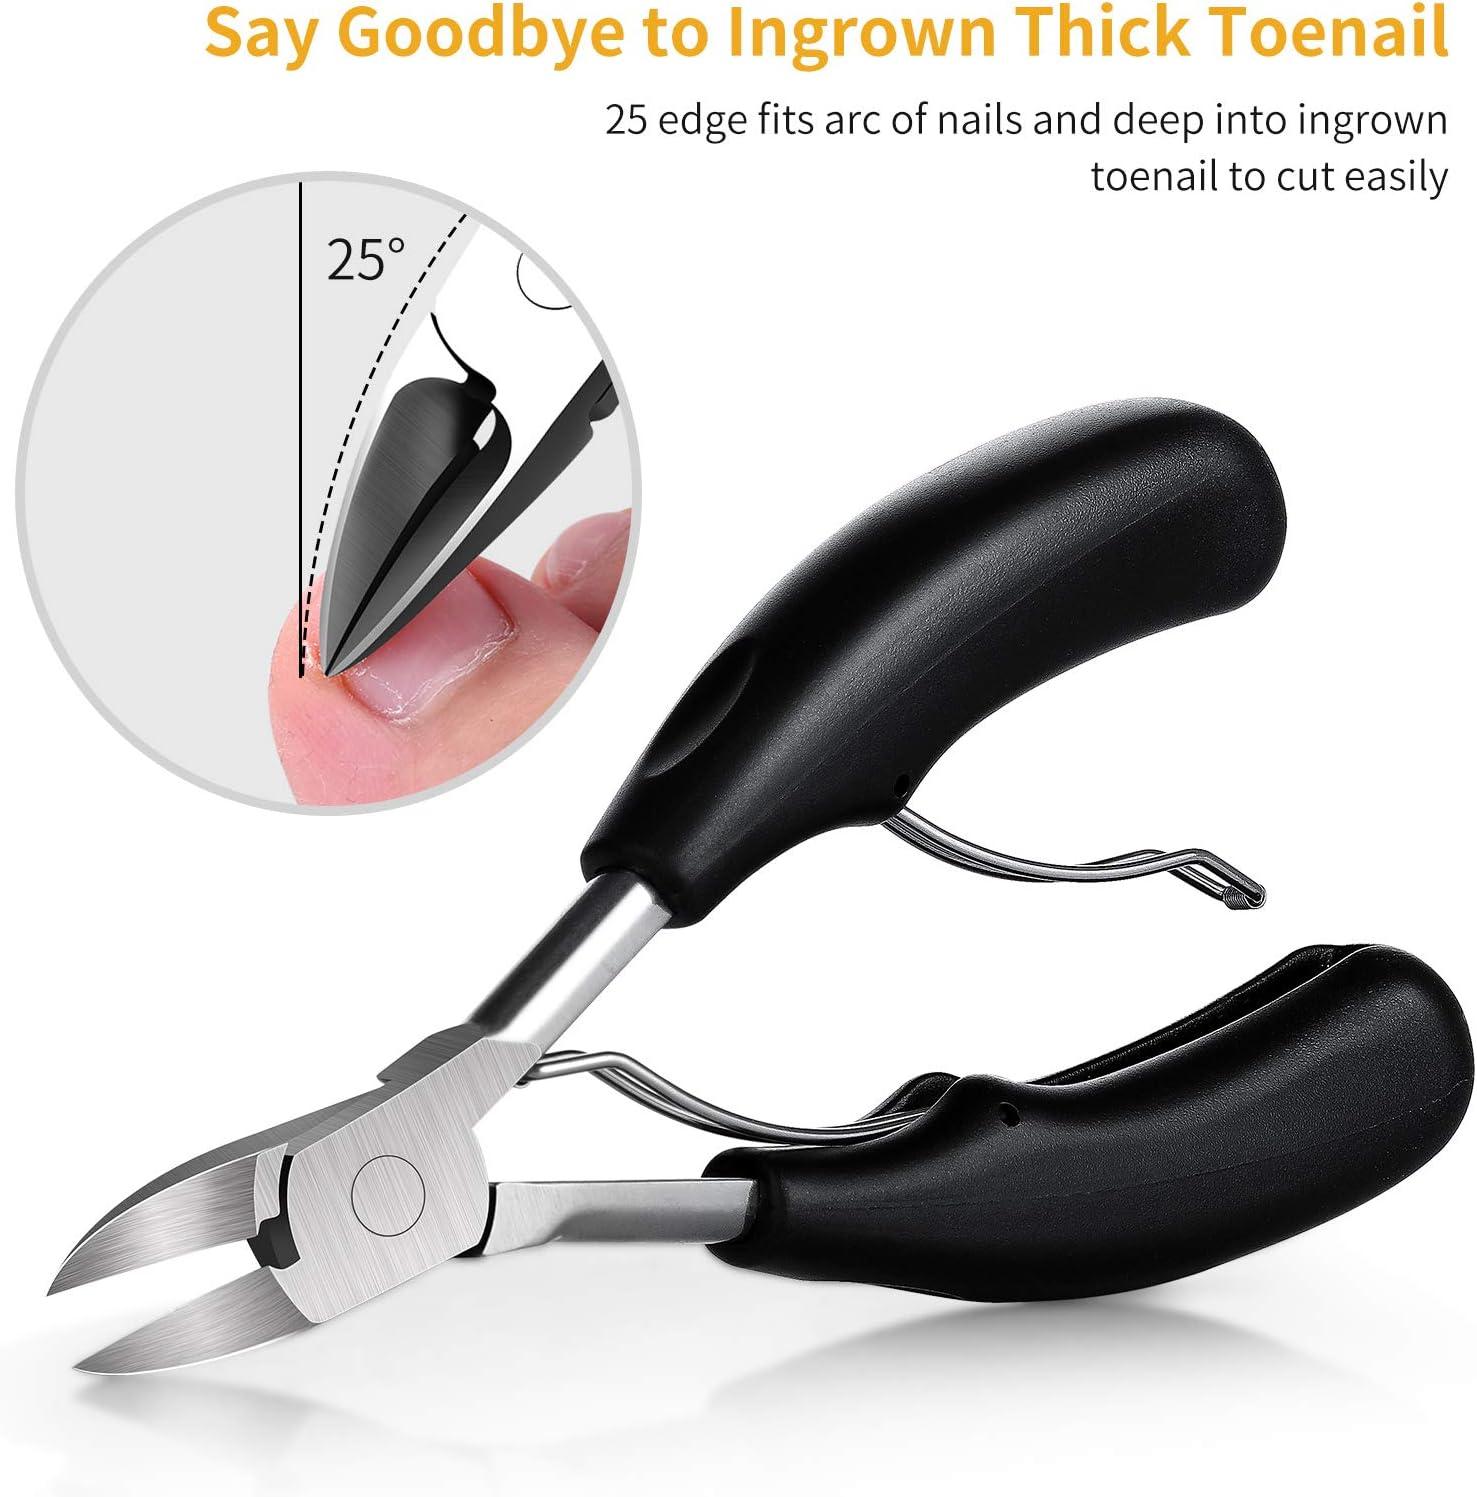 Ingrown Toenail Clippers (Upgrade), Steel Nail Clippers for Professional  Podiatrist, Unique Long Handle Curved Blade Tool for Thick & Ingrown Nails